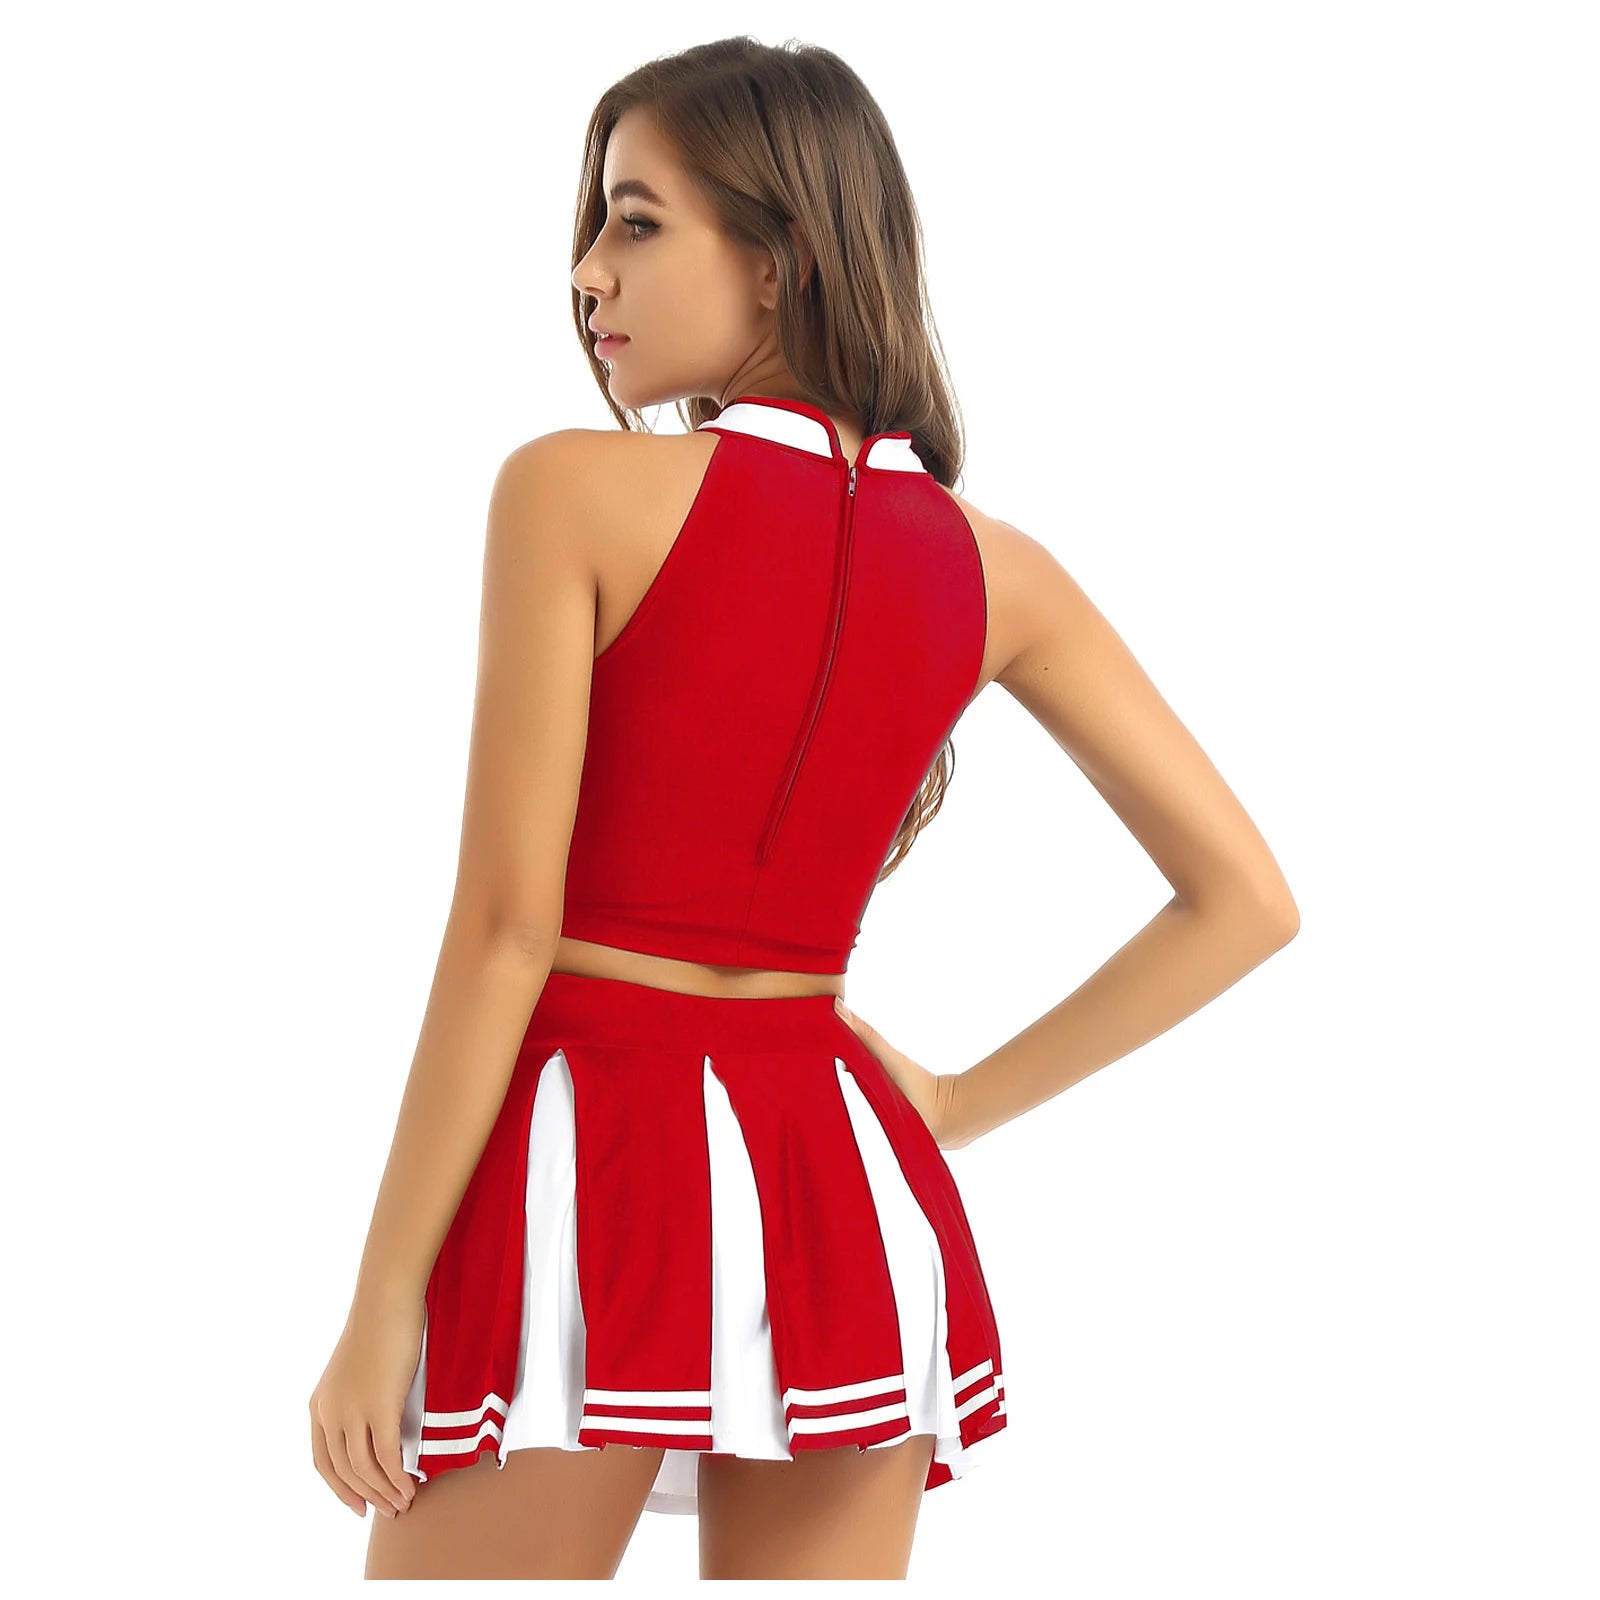 2 Piece Cheerleader Costume Women Adult Cheerleading Uniform Dancing Outfit Sleeveless Crop Top with Mini Pleated Skirt The Clothing Company Sydney